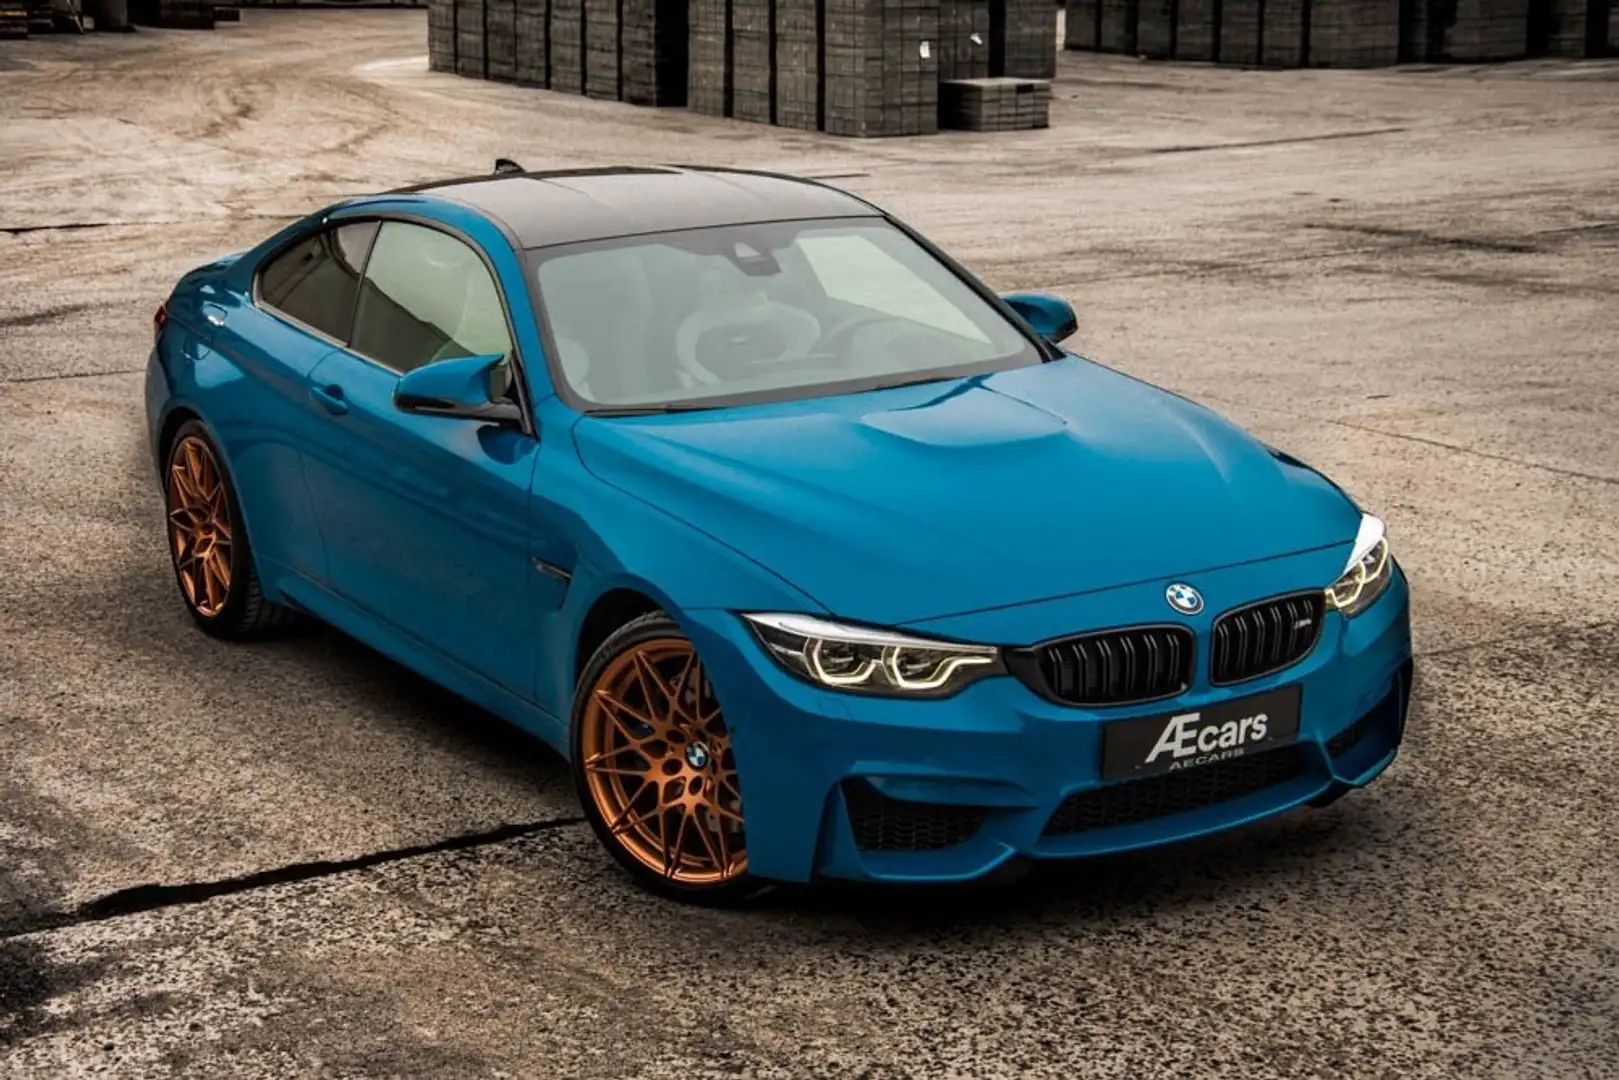 BMW M4 *** COMPETITION HERITAGE / LIMITED 1 OF 750 *** plava - 2